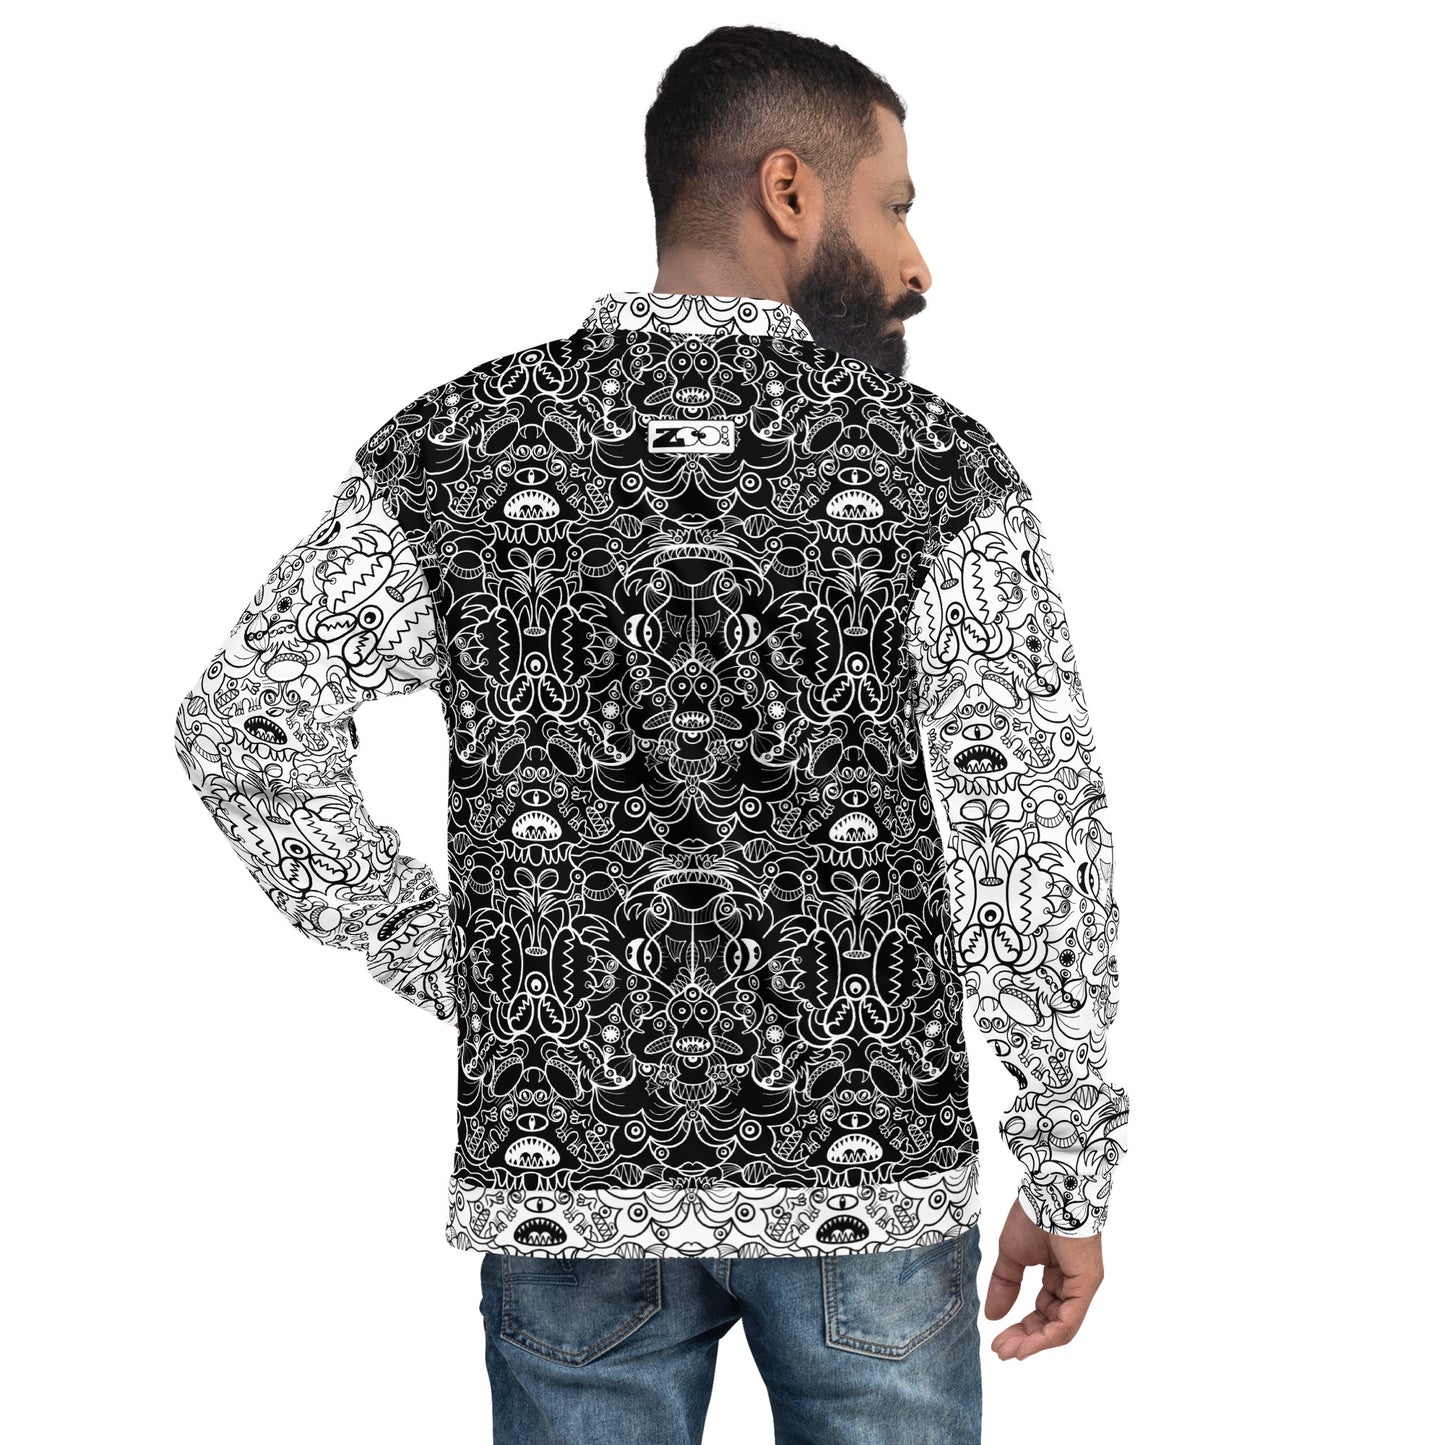 The Powerful Dark Side of the Doodle World - Unisex Bomber Jacket. Back view